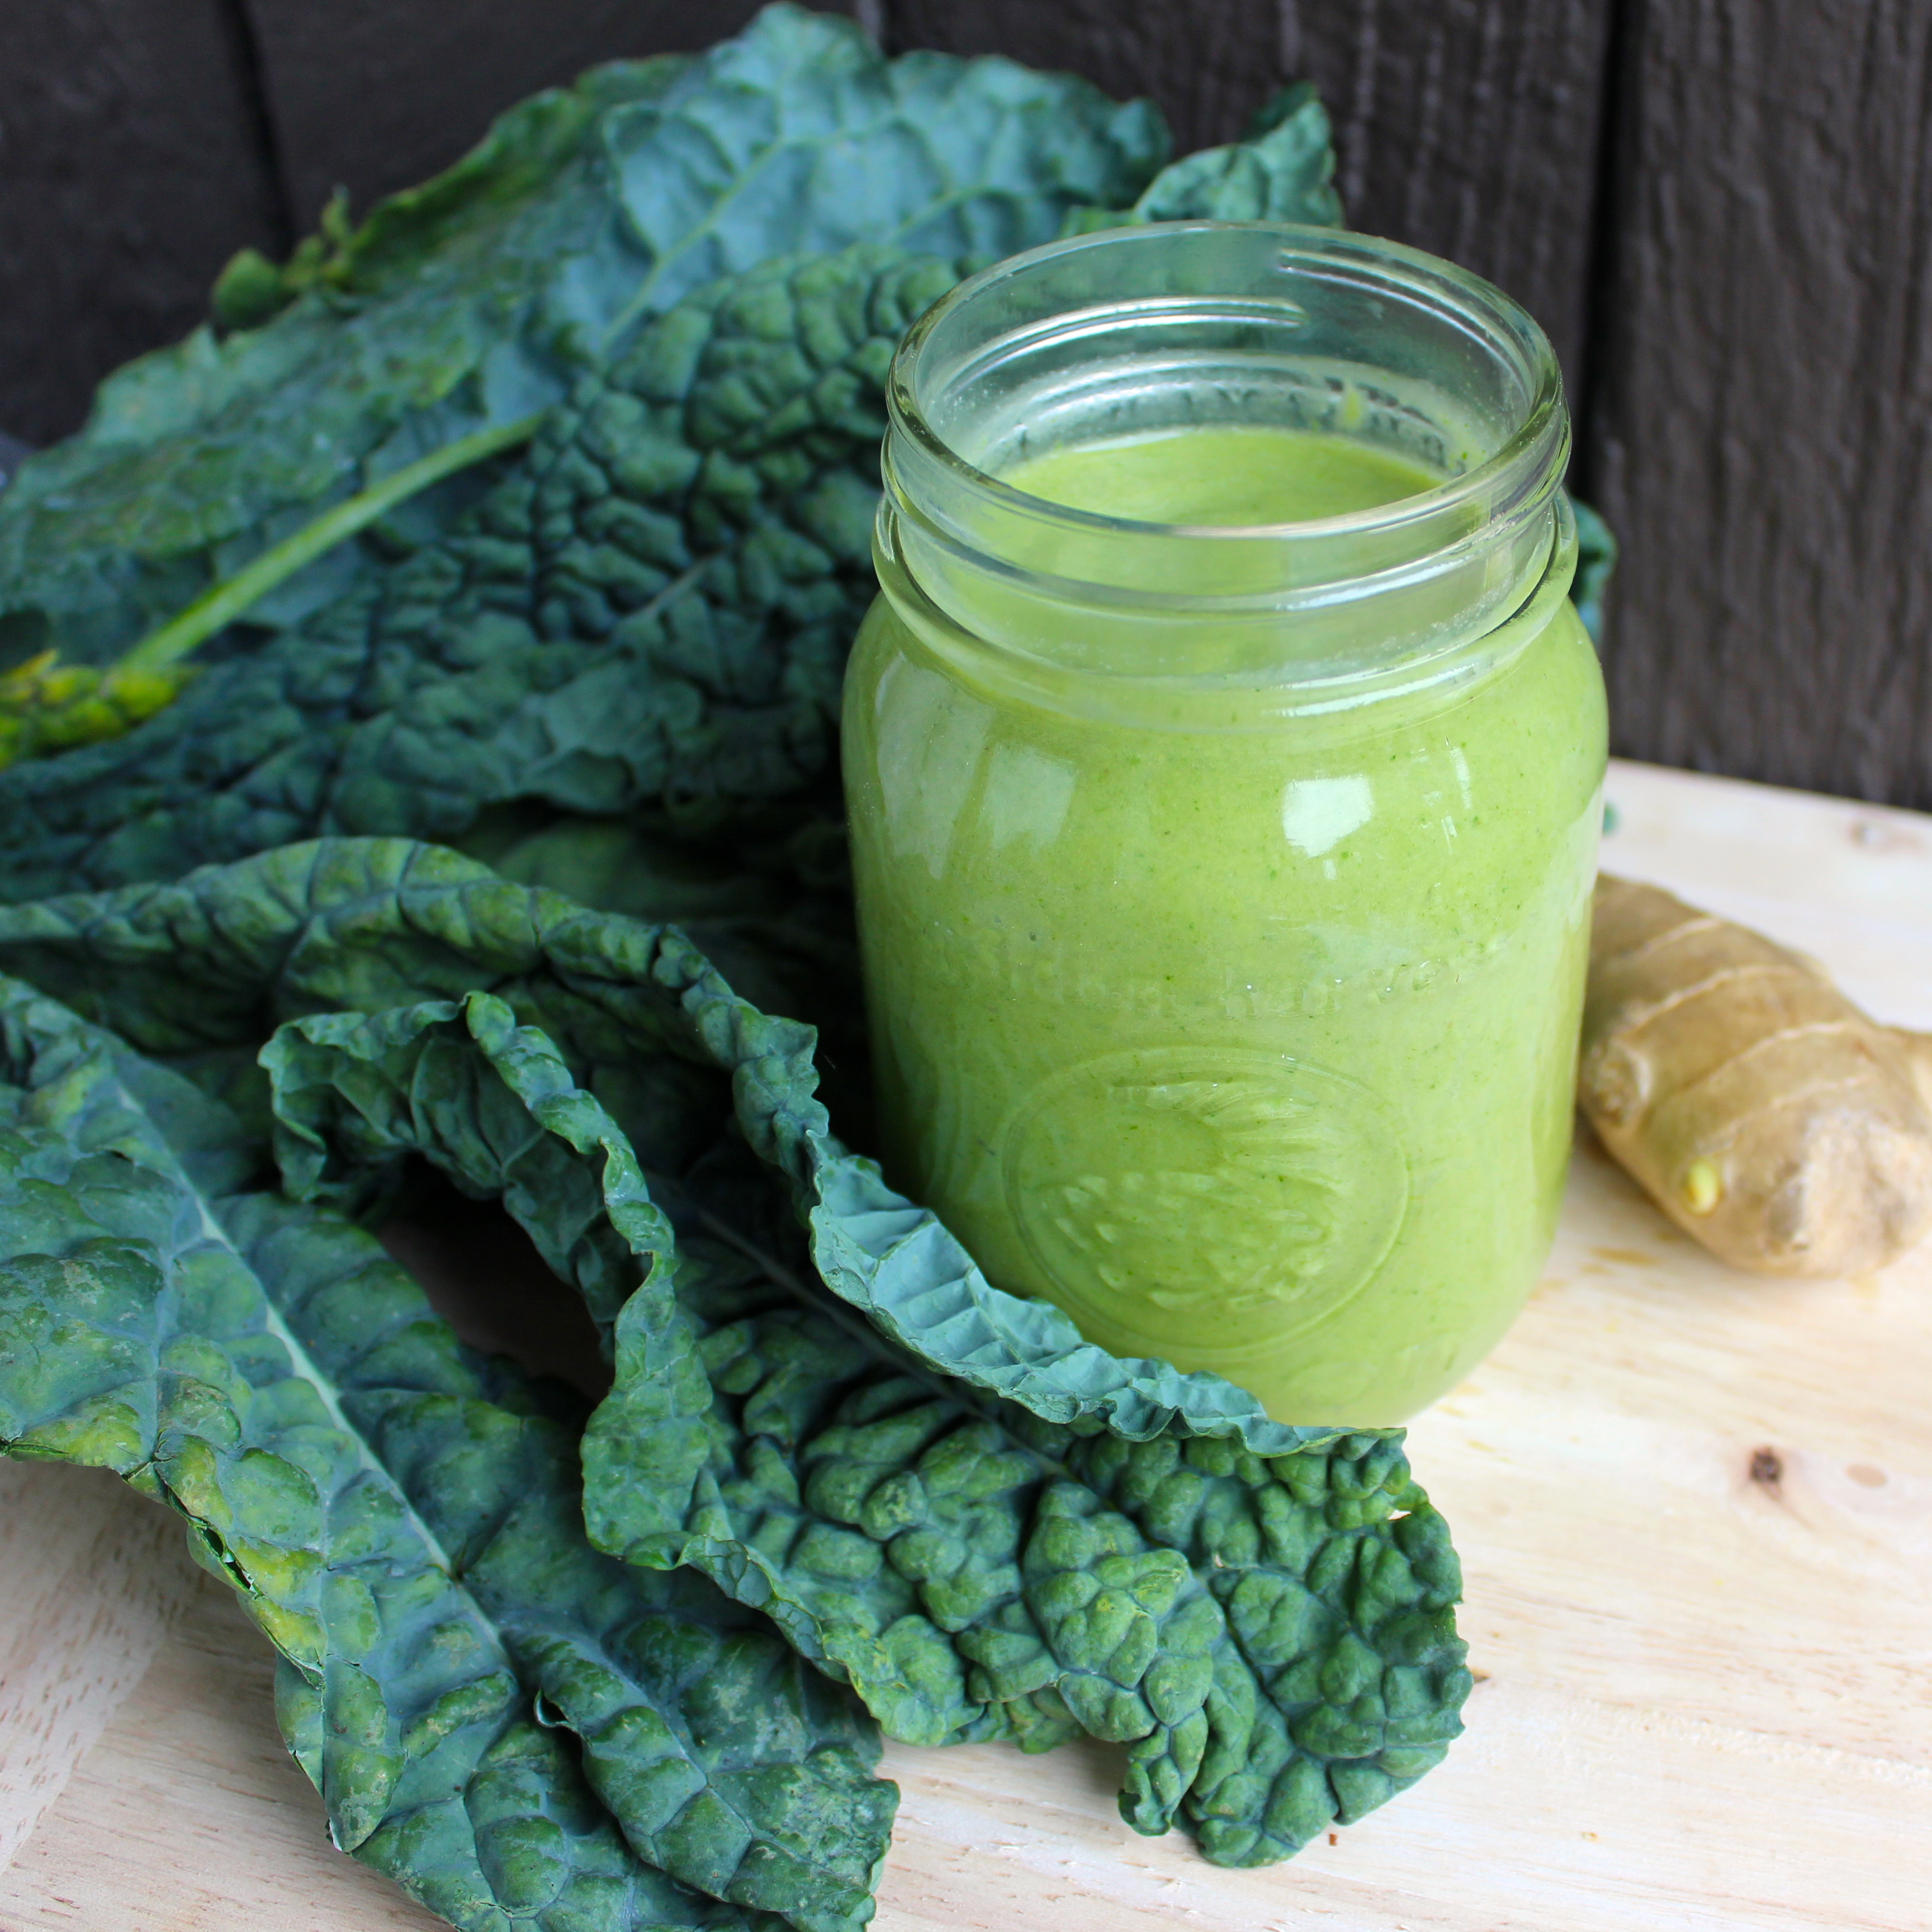 Kale Ginger Smoothie with Flax Seeds